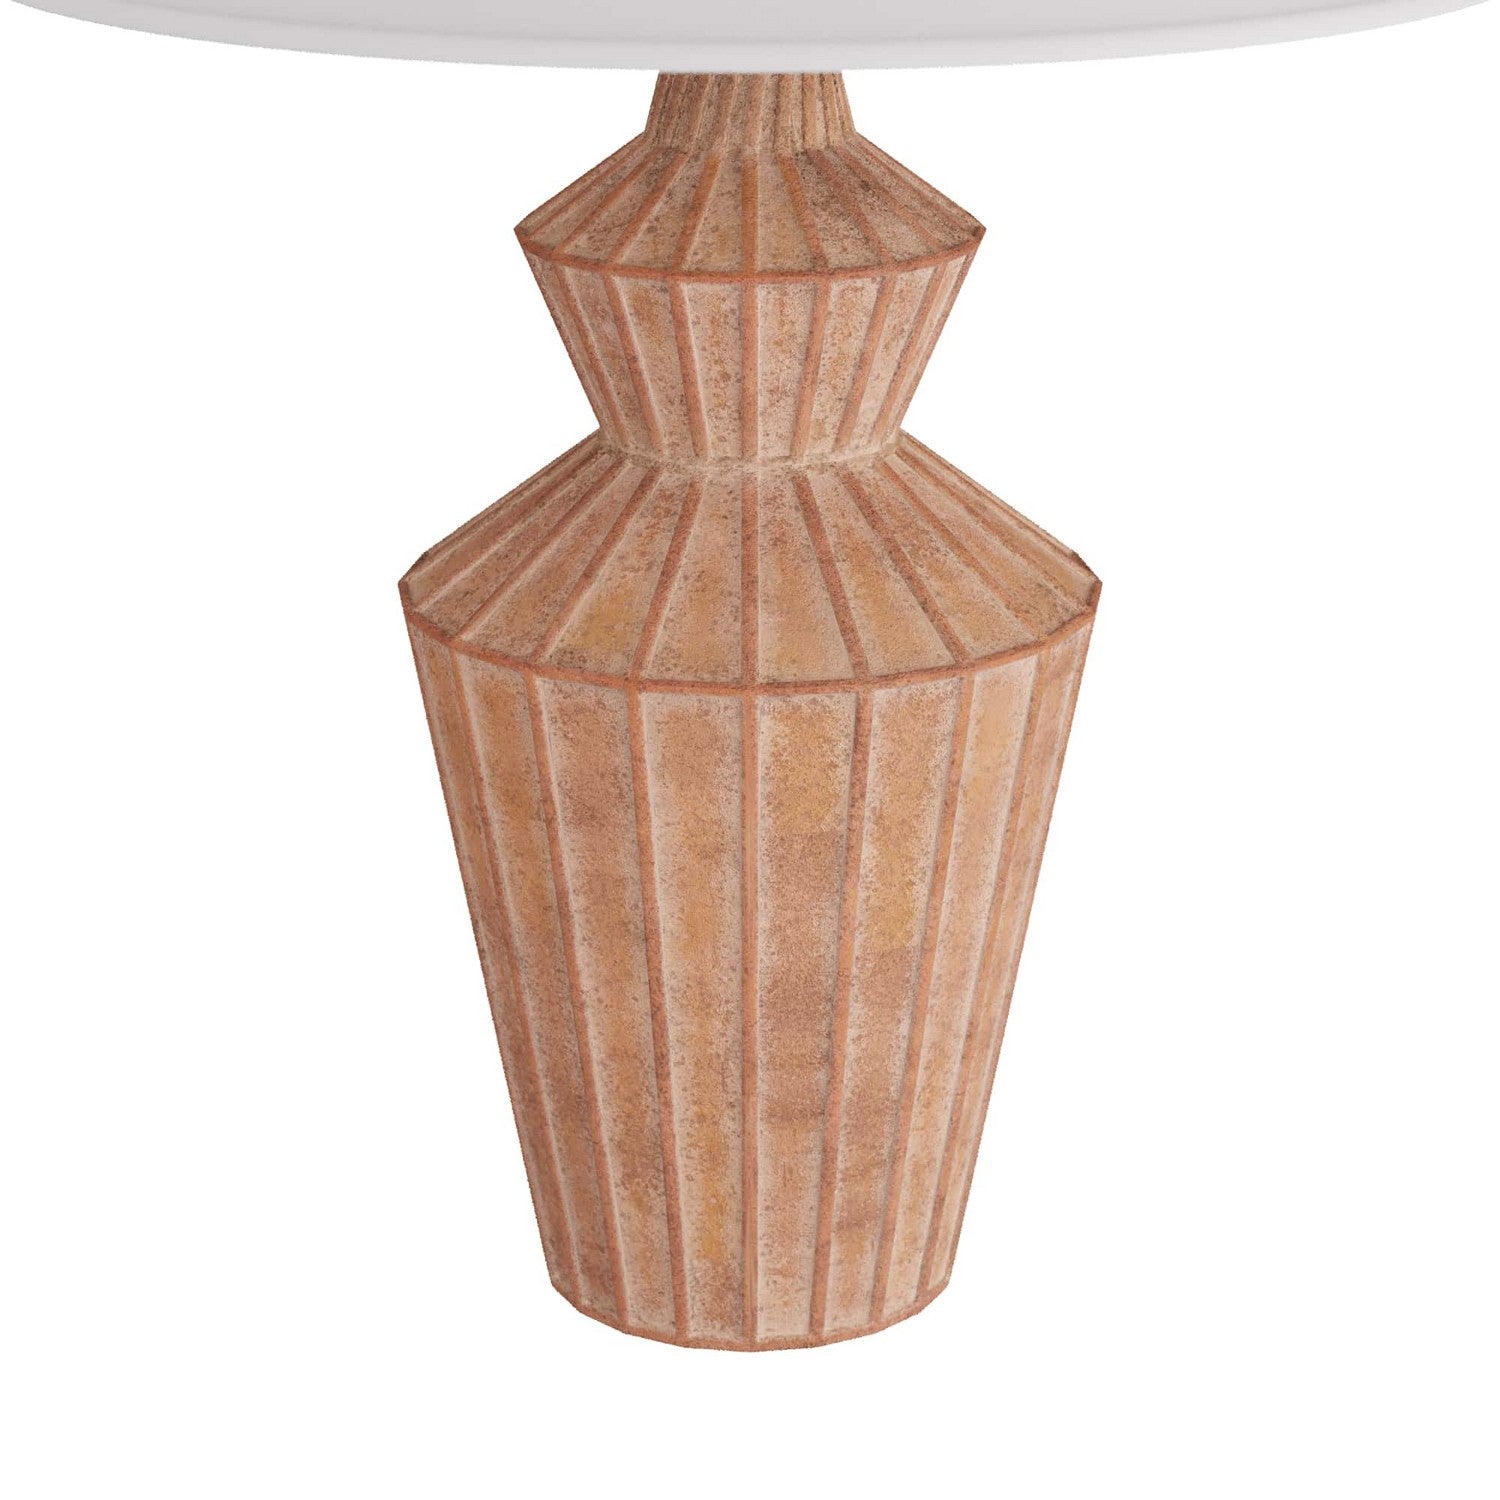 One Light Table Lamp from the Wren collection in White Wash Terracotta finish